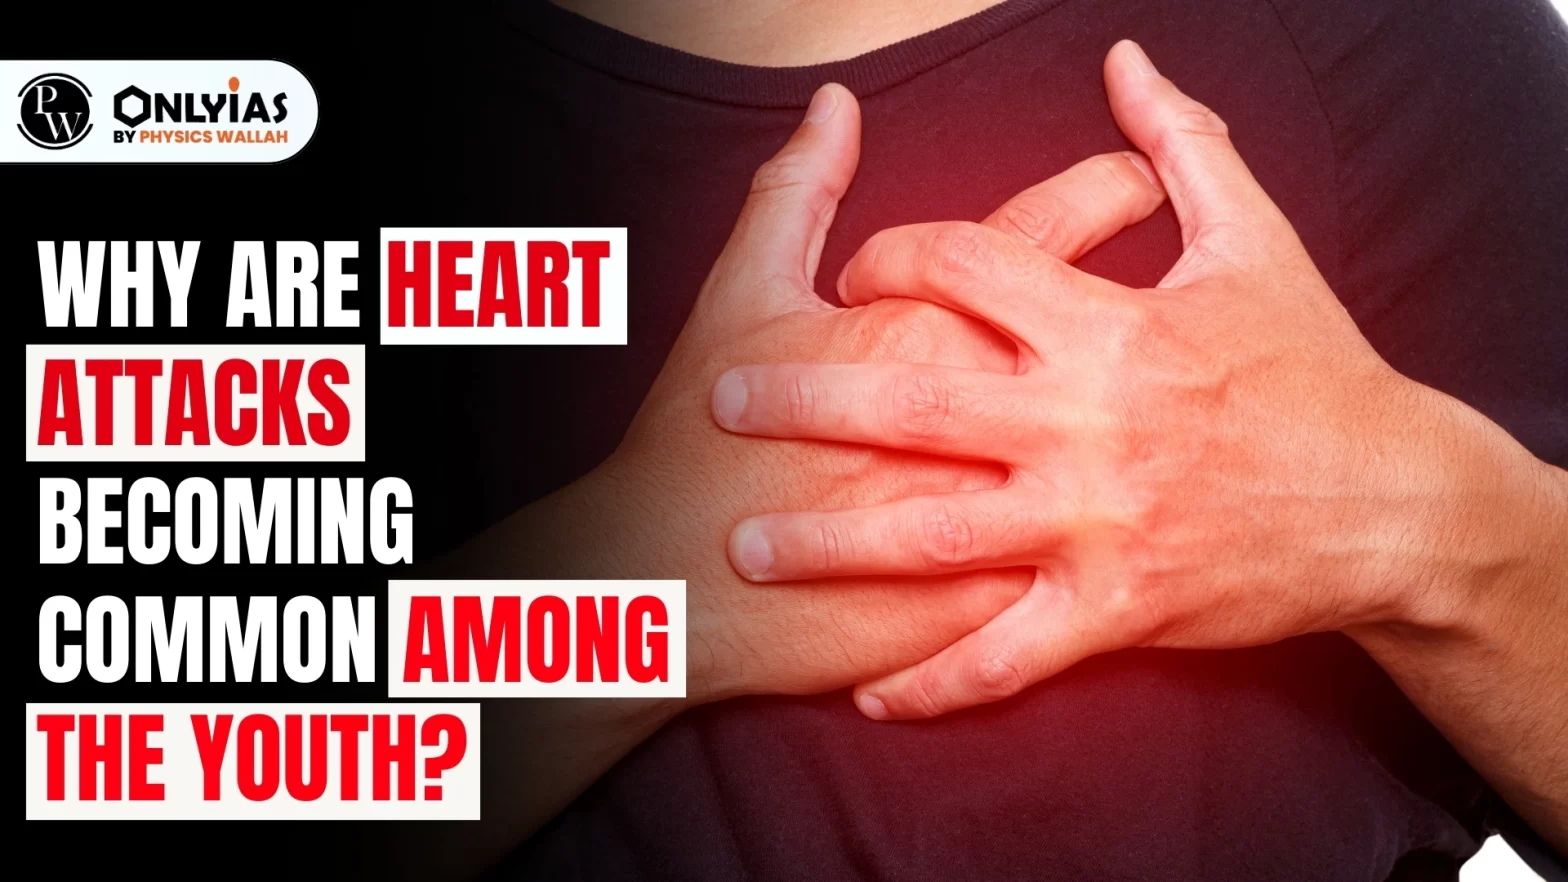 Why Are Heart Attacks Becoming Common Among The Youth?